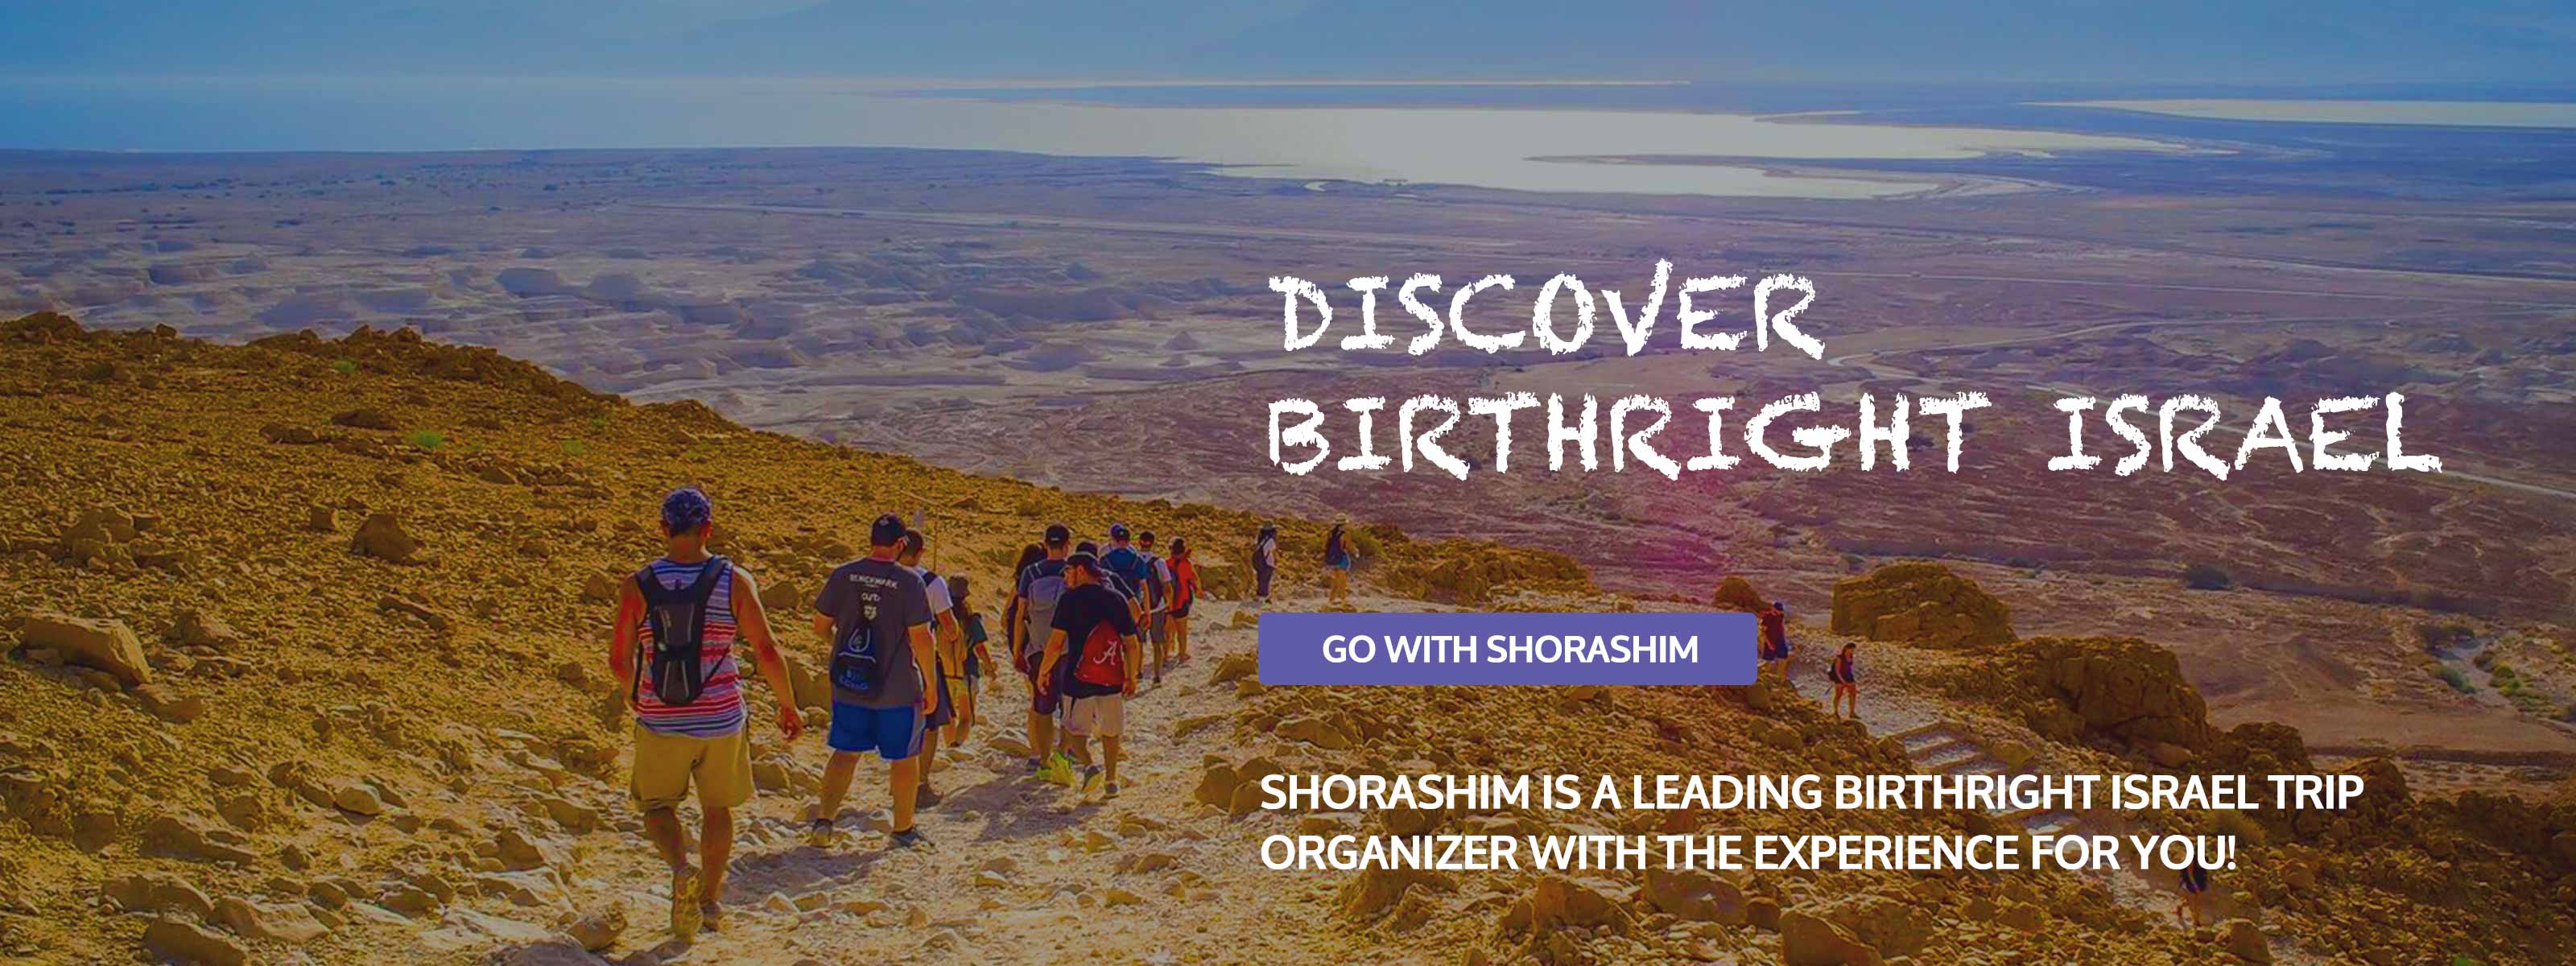 what is israel birthright trip